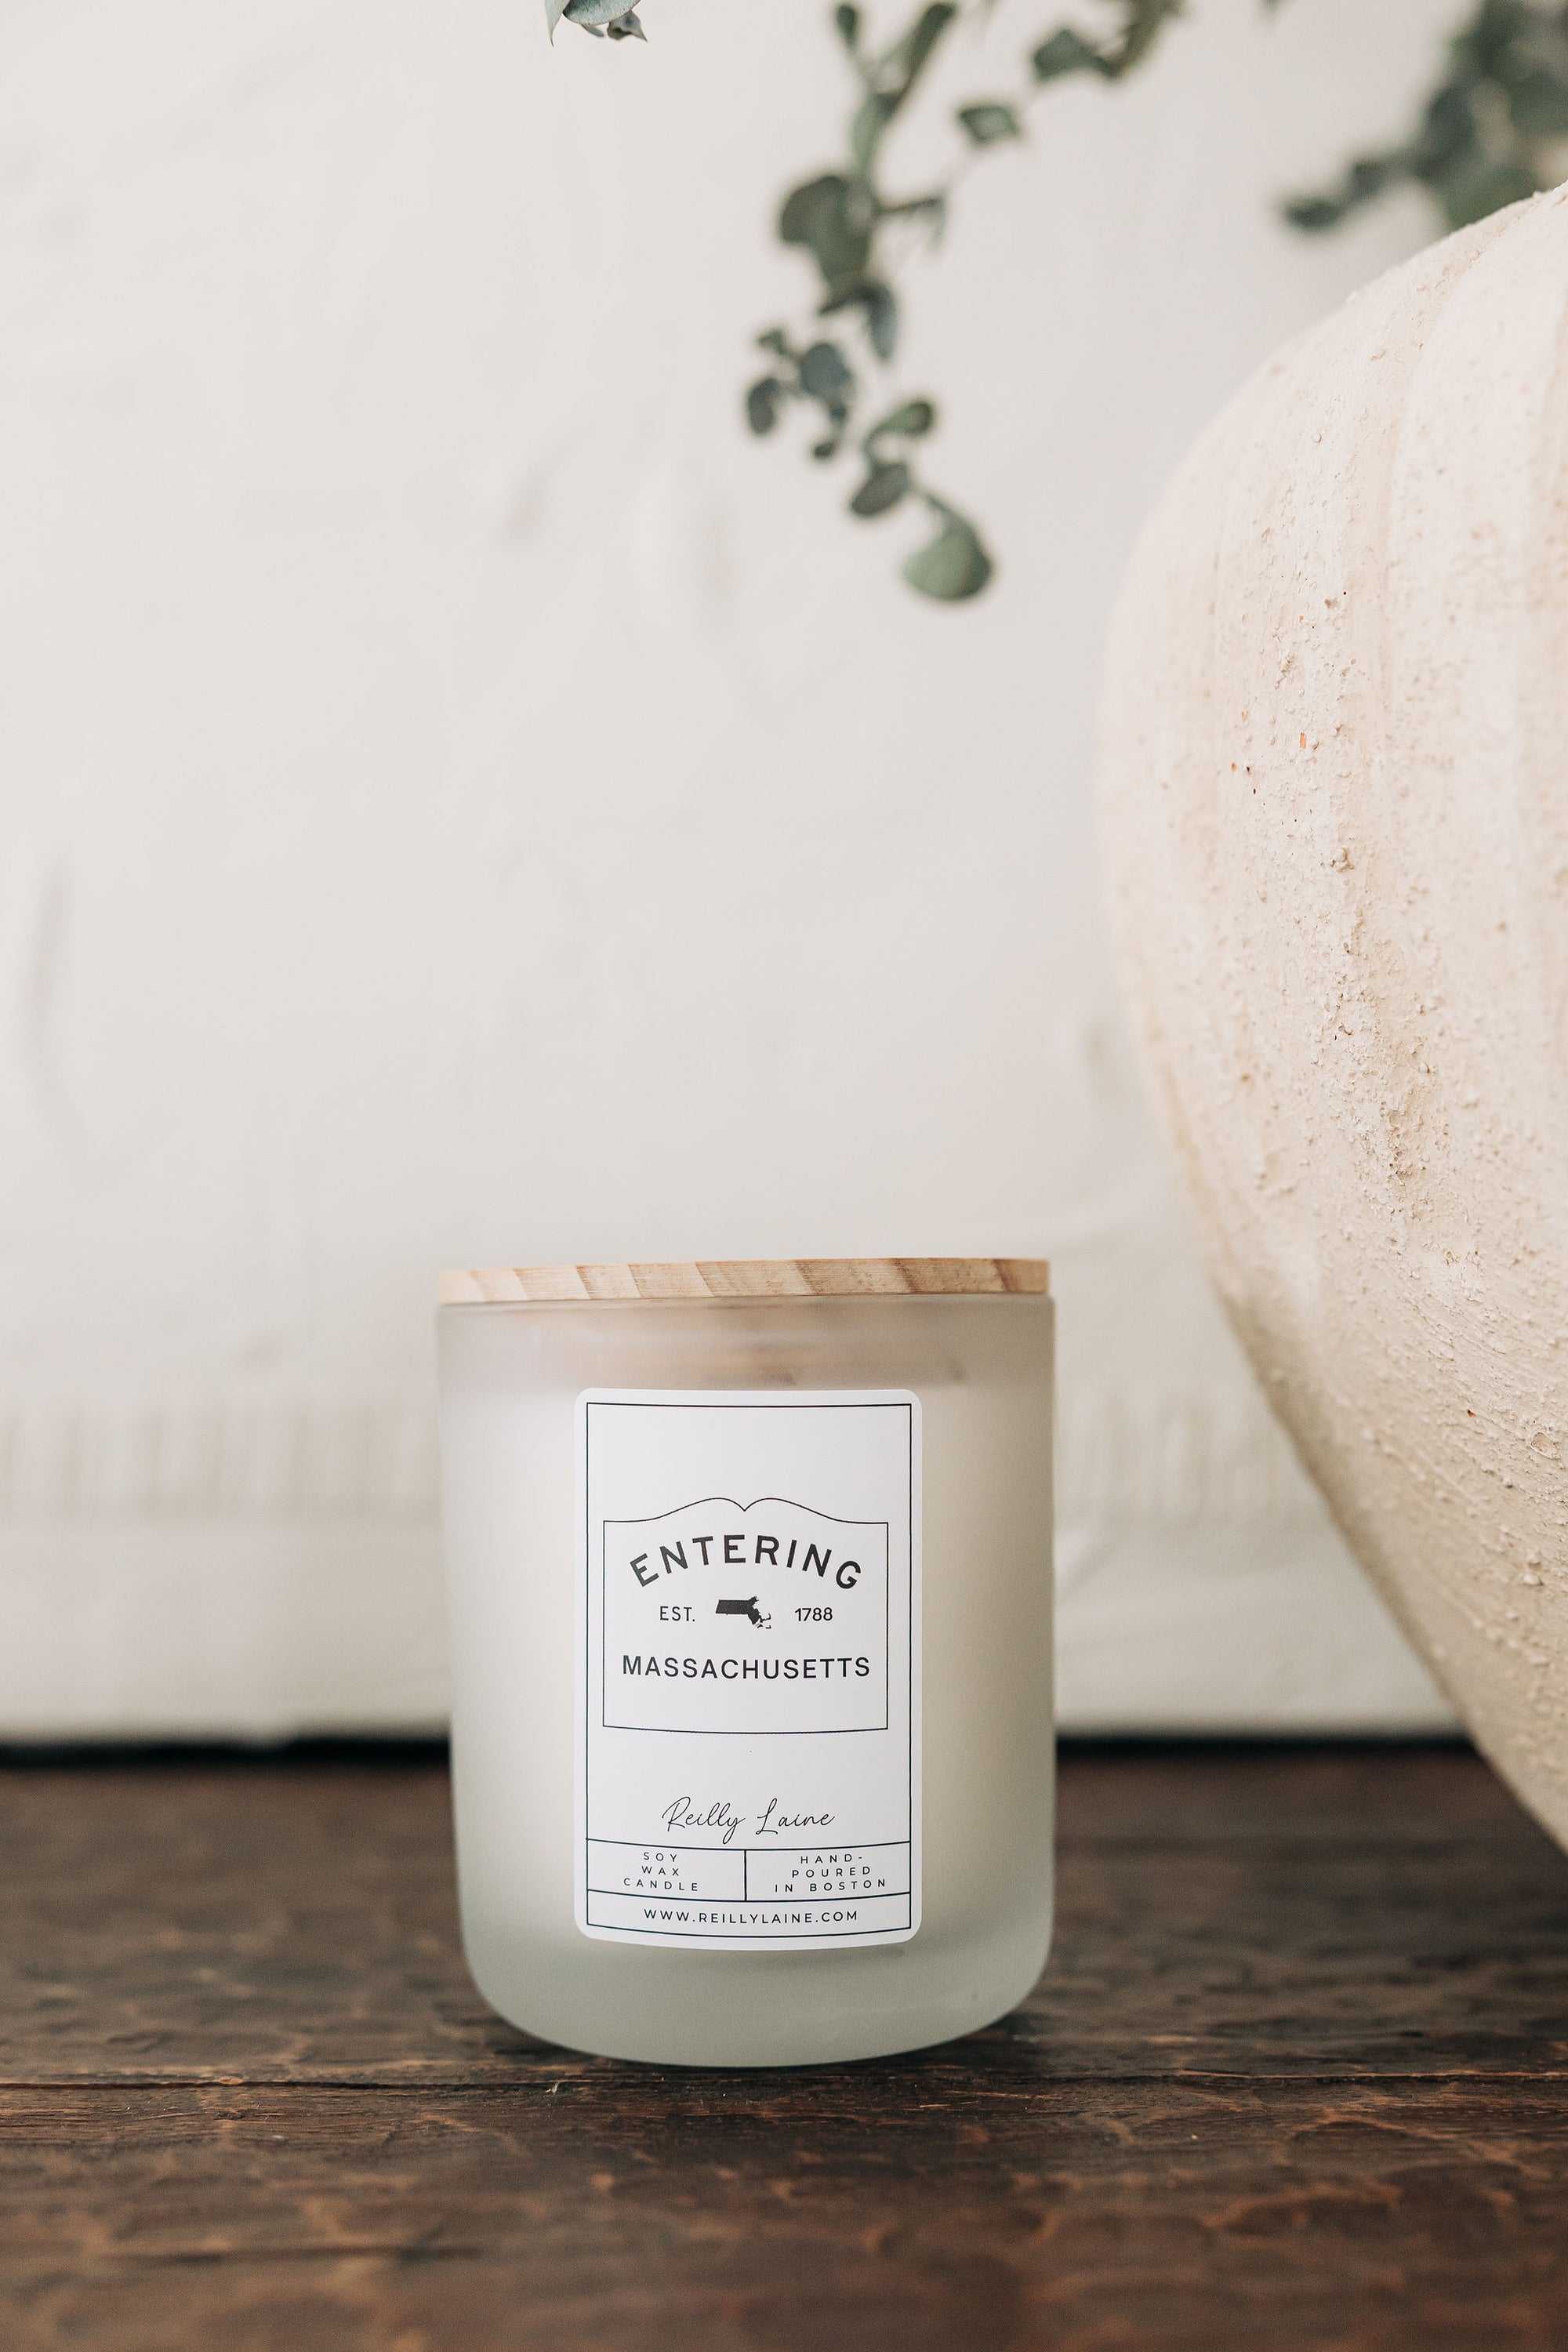 Now Entering: Massachusetts Candle Label